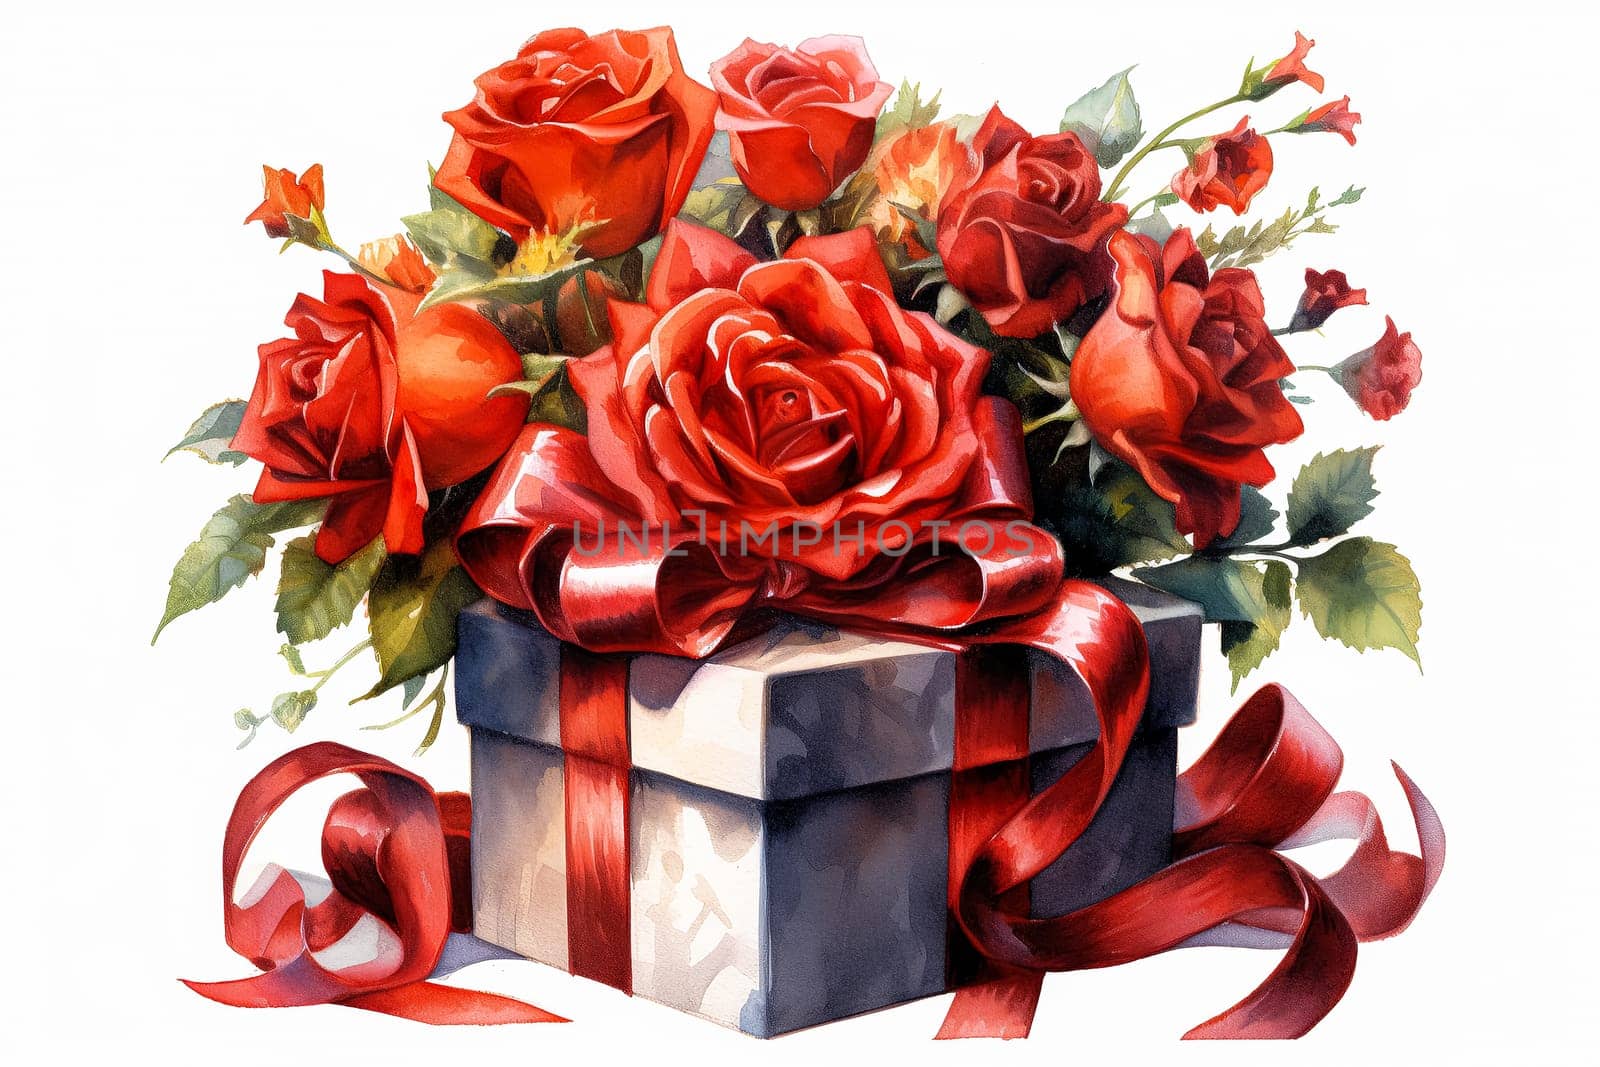 Cherish the sentiment of love with a watercolor illustration portraying a romantic holiday box adorned with a gift, embodying the essence of Valentines Day.